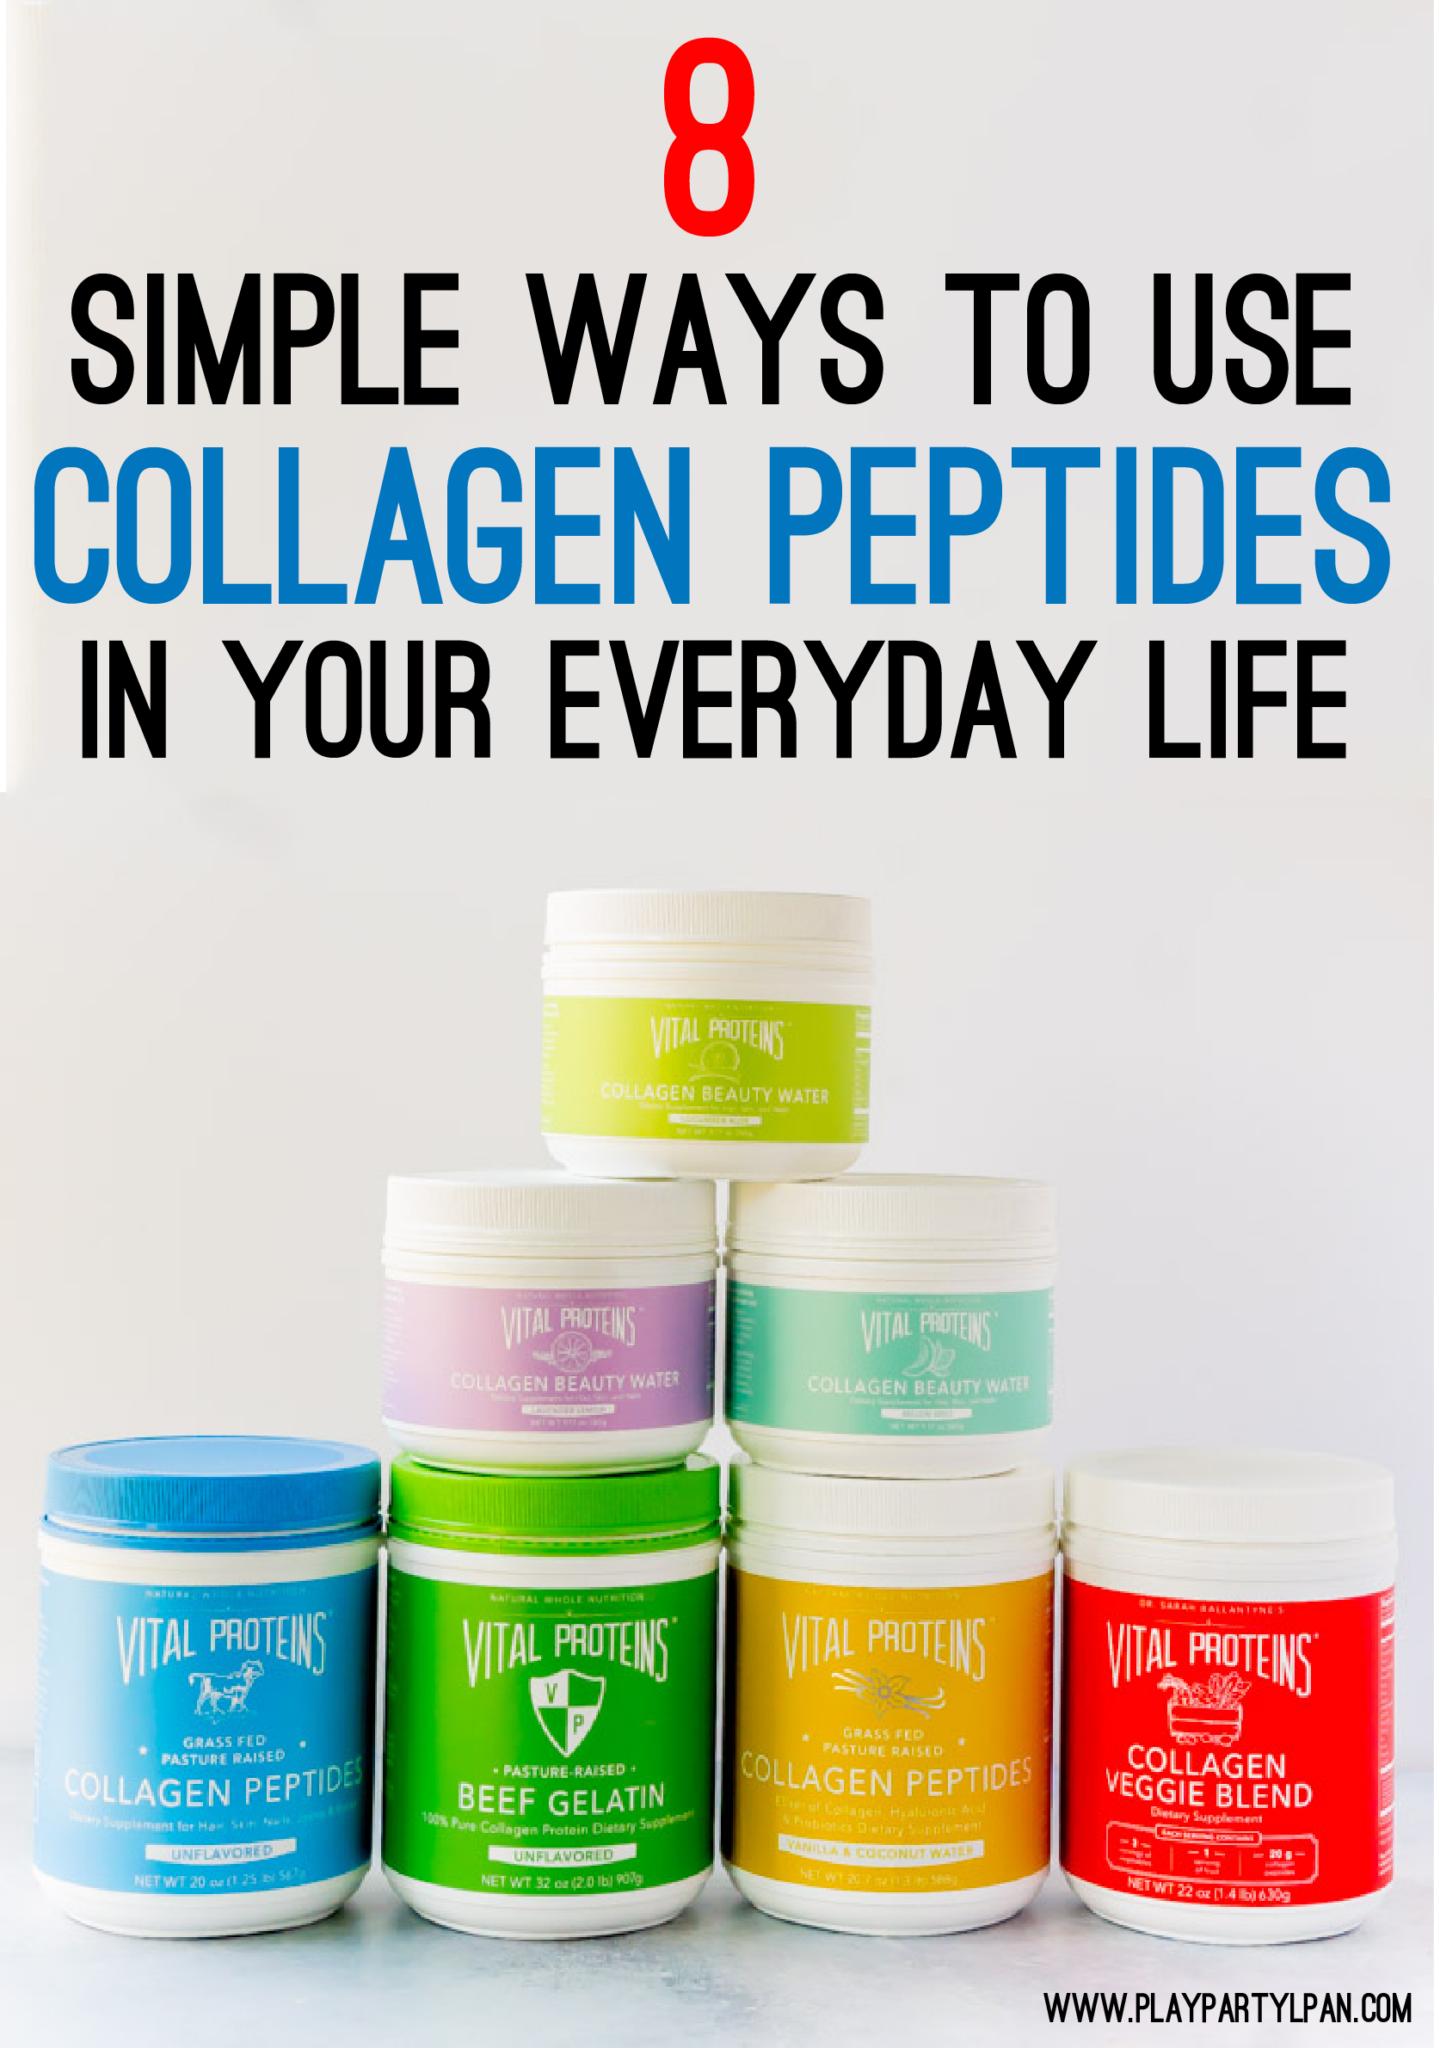 8 Simple Ways To Use Vital Proteins Collagen Peptides Play Party Plan